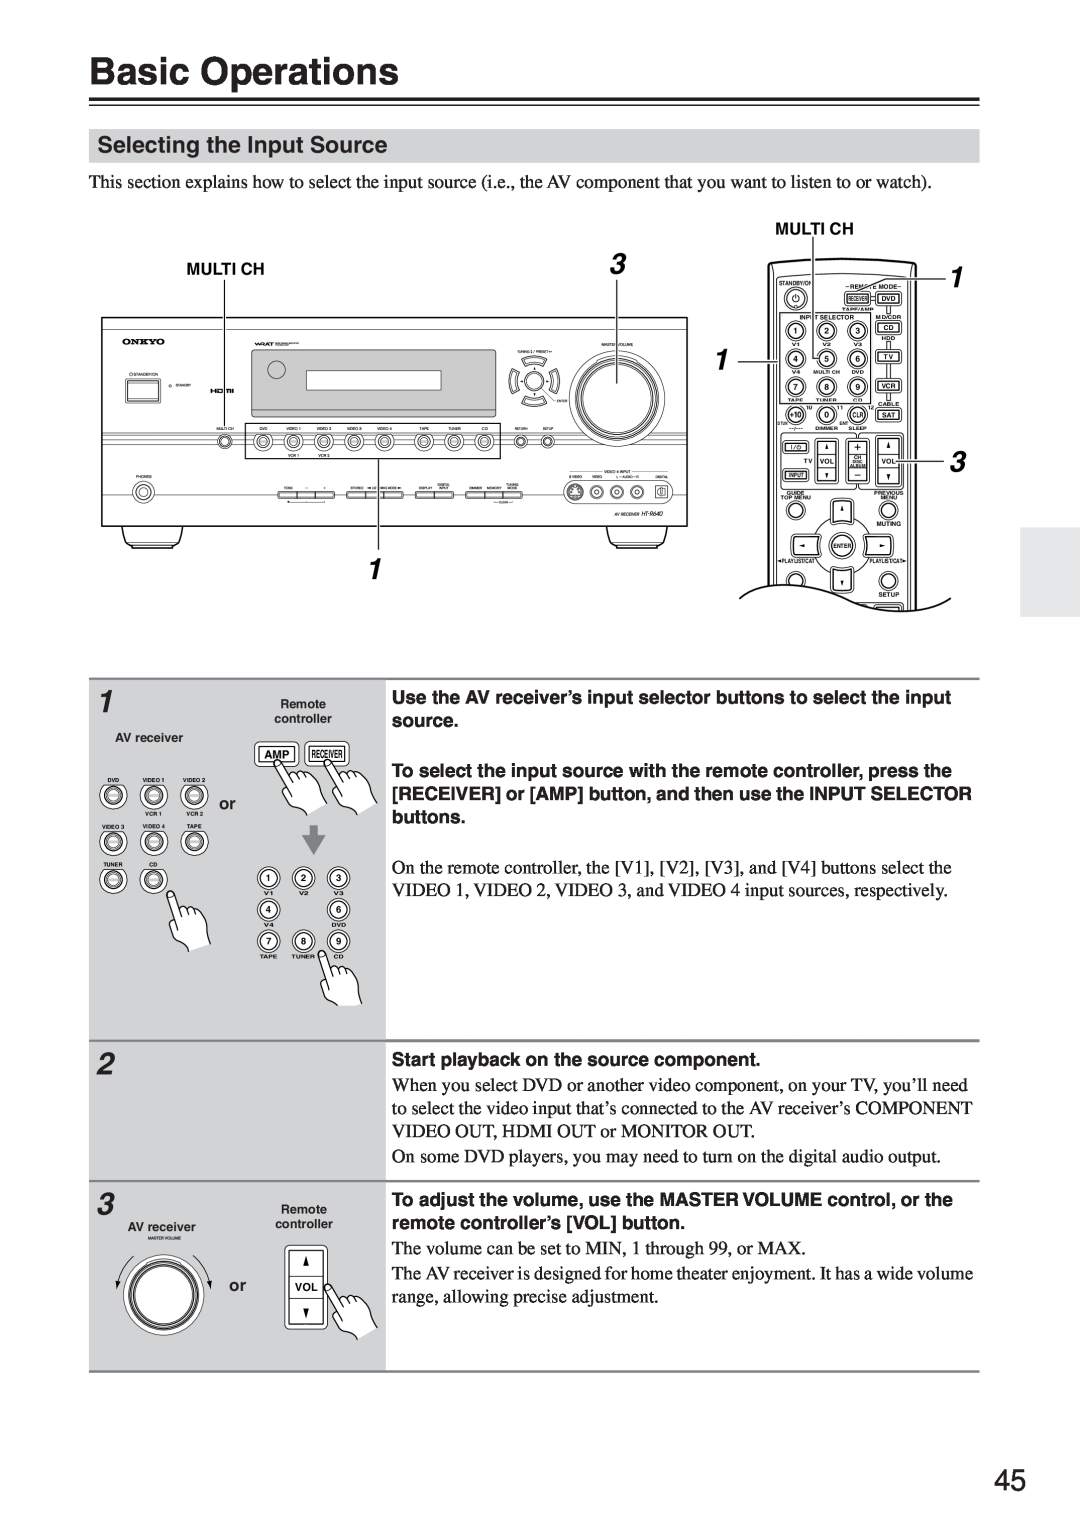 Onkyo HT-R640 instruction manual Basic Operations, Selecting the Input Source 